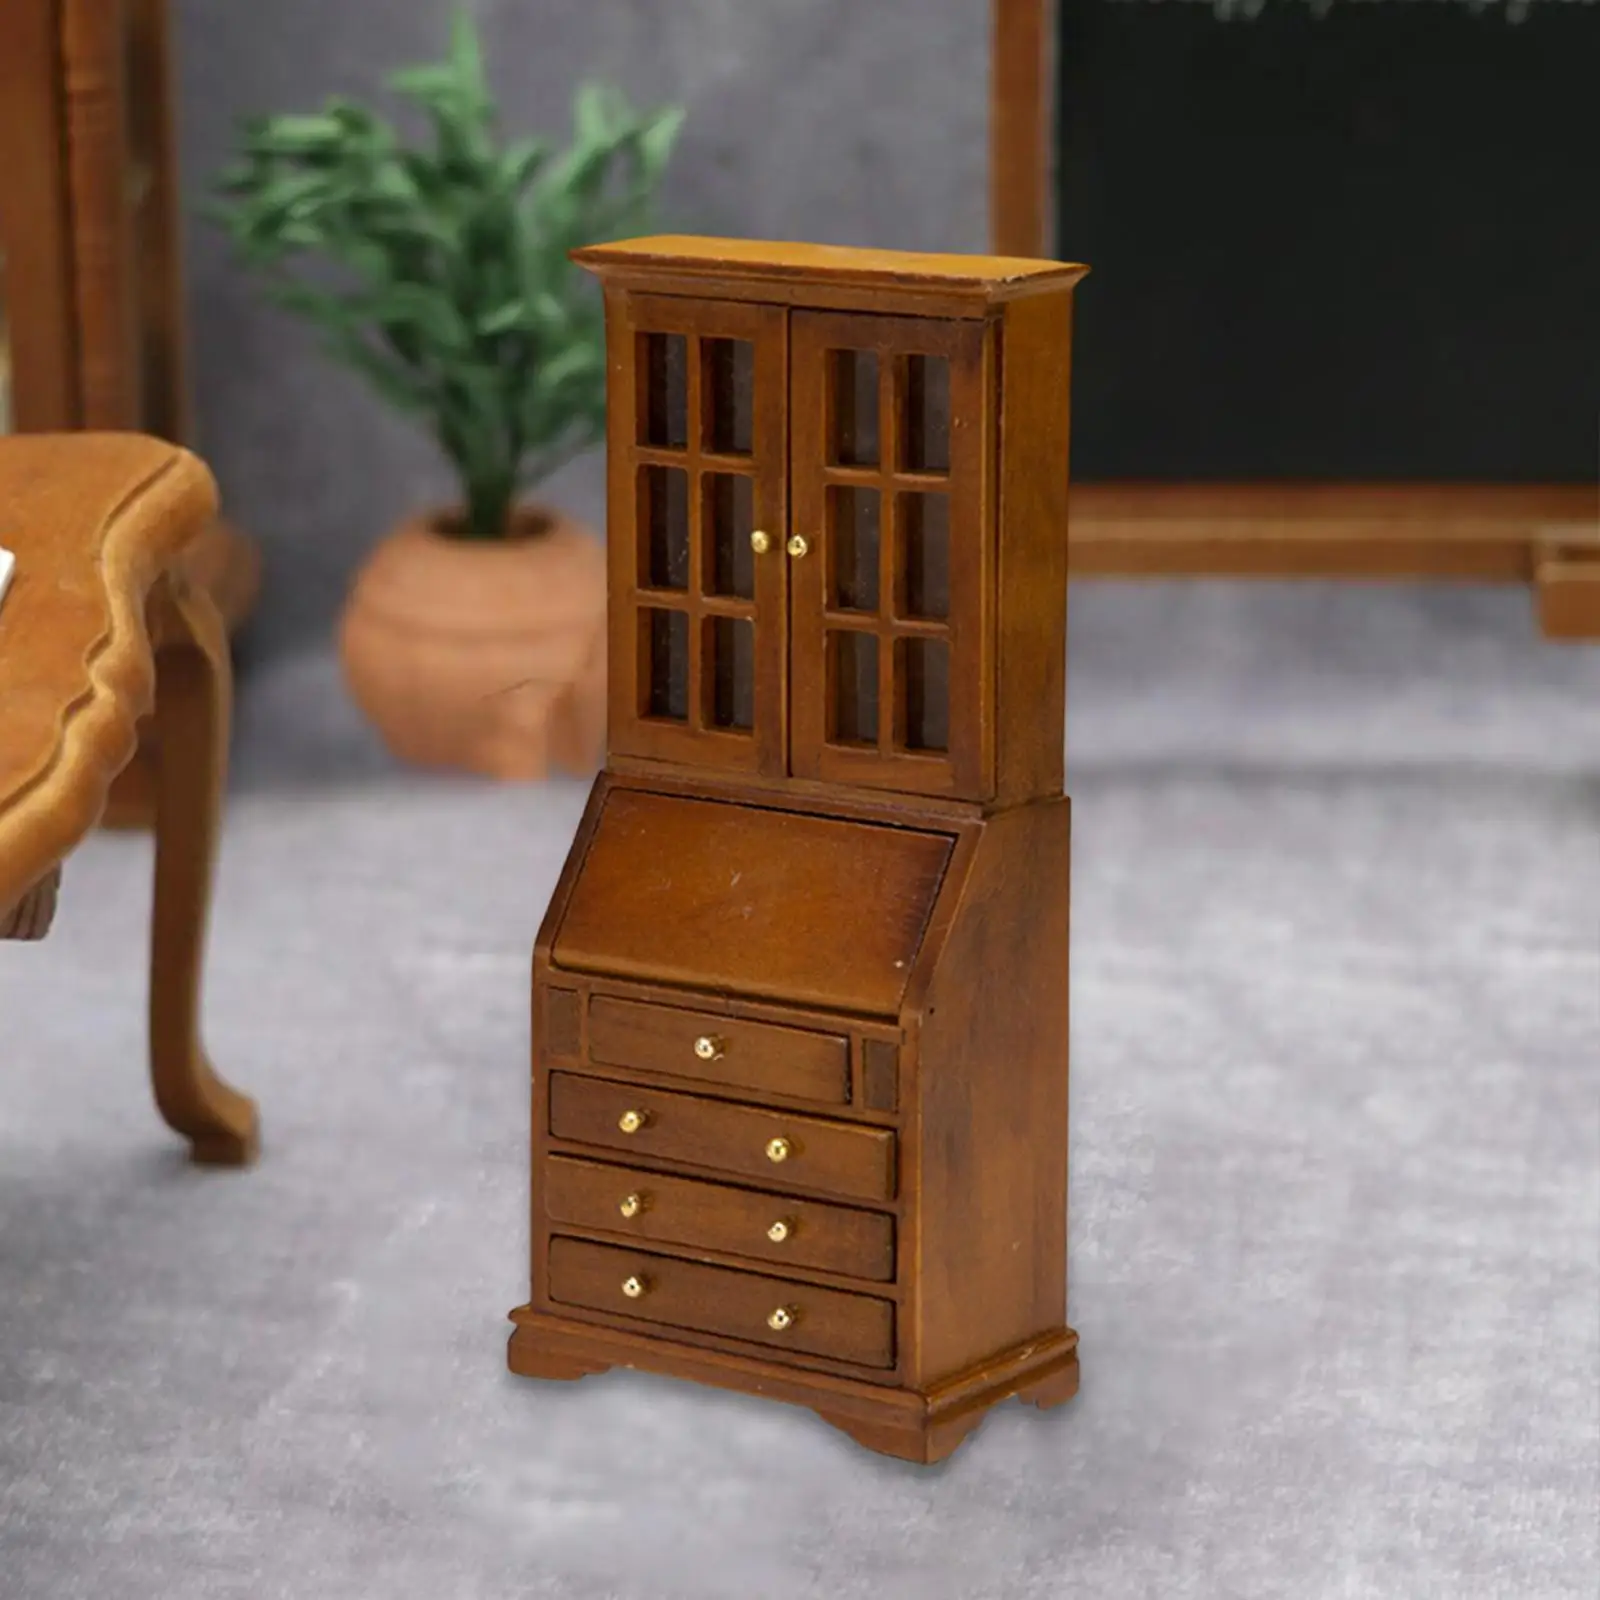 1/12 Dollhouse Bookcase Storage Cabinet Wood Model Study Decor Doll House Accessories Simulated Landscape 2.7x1.5x6inch Delicate